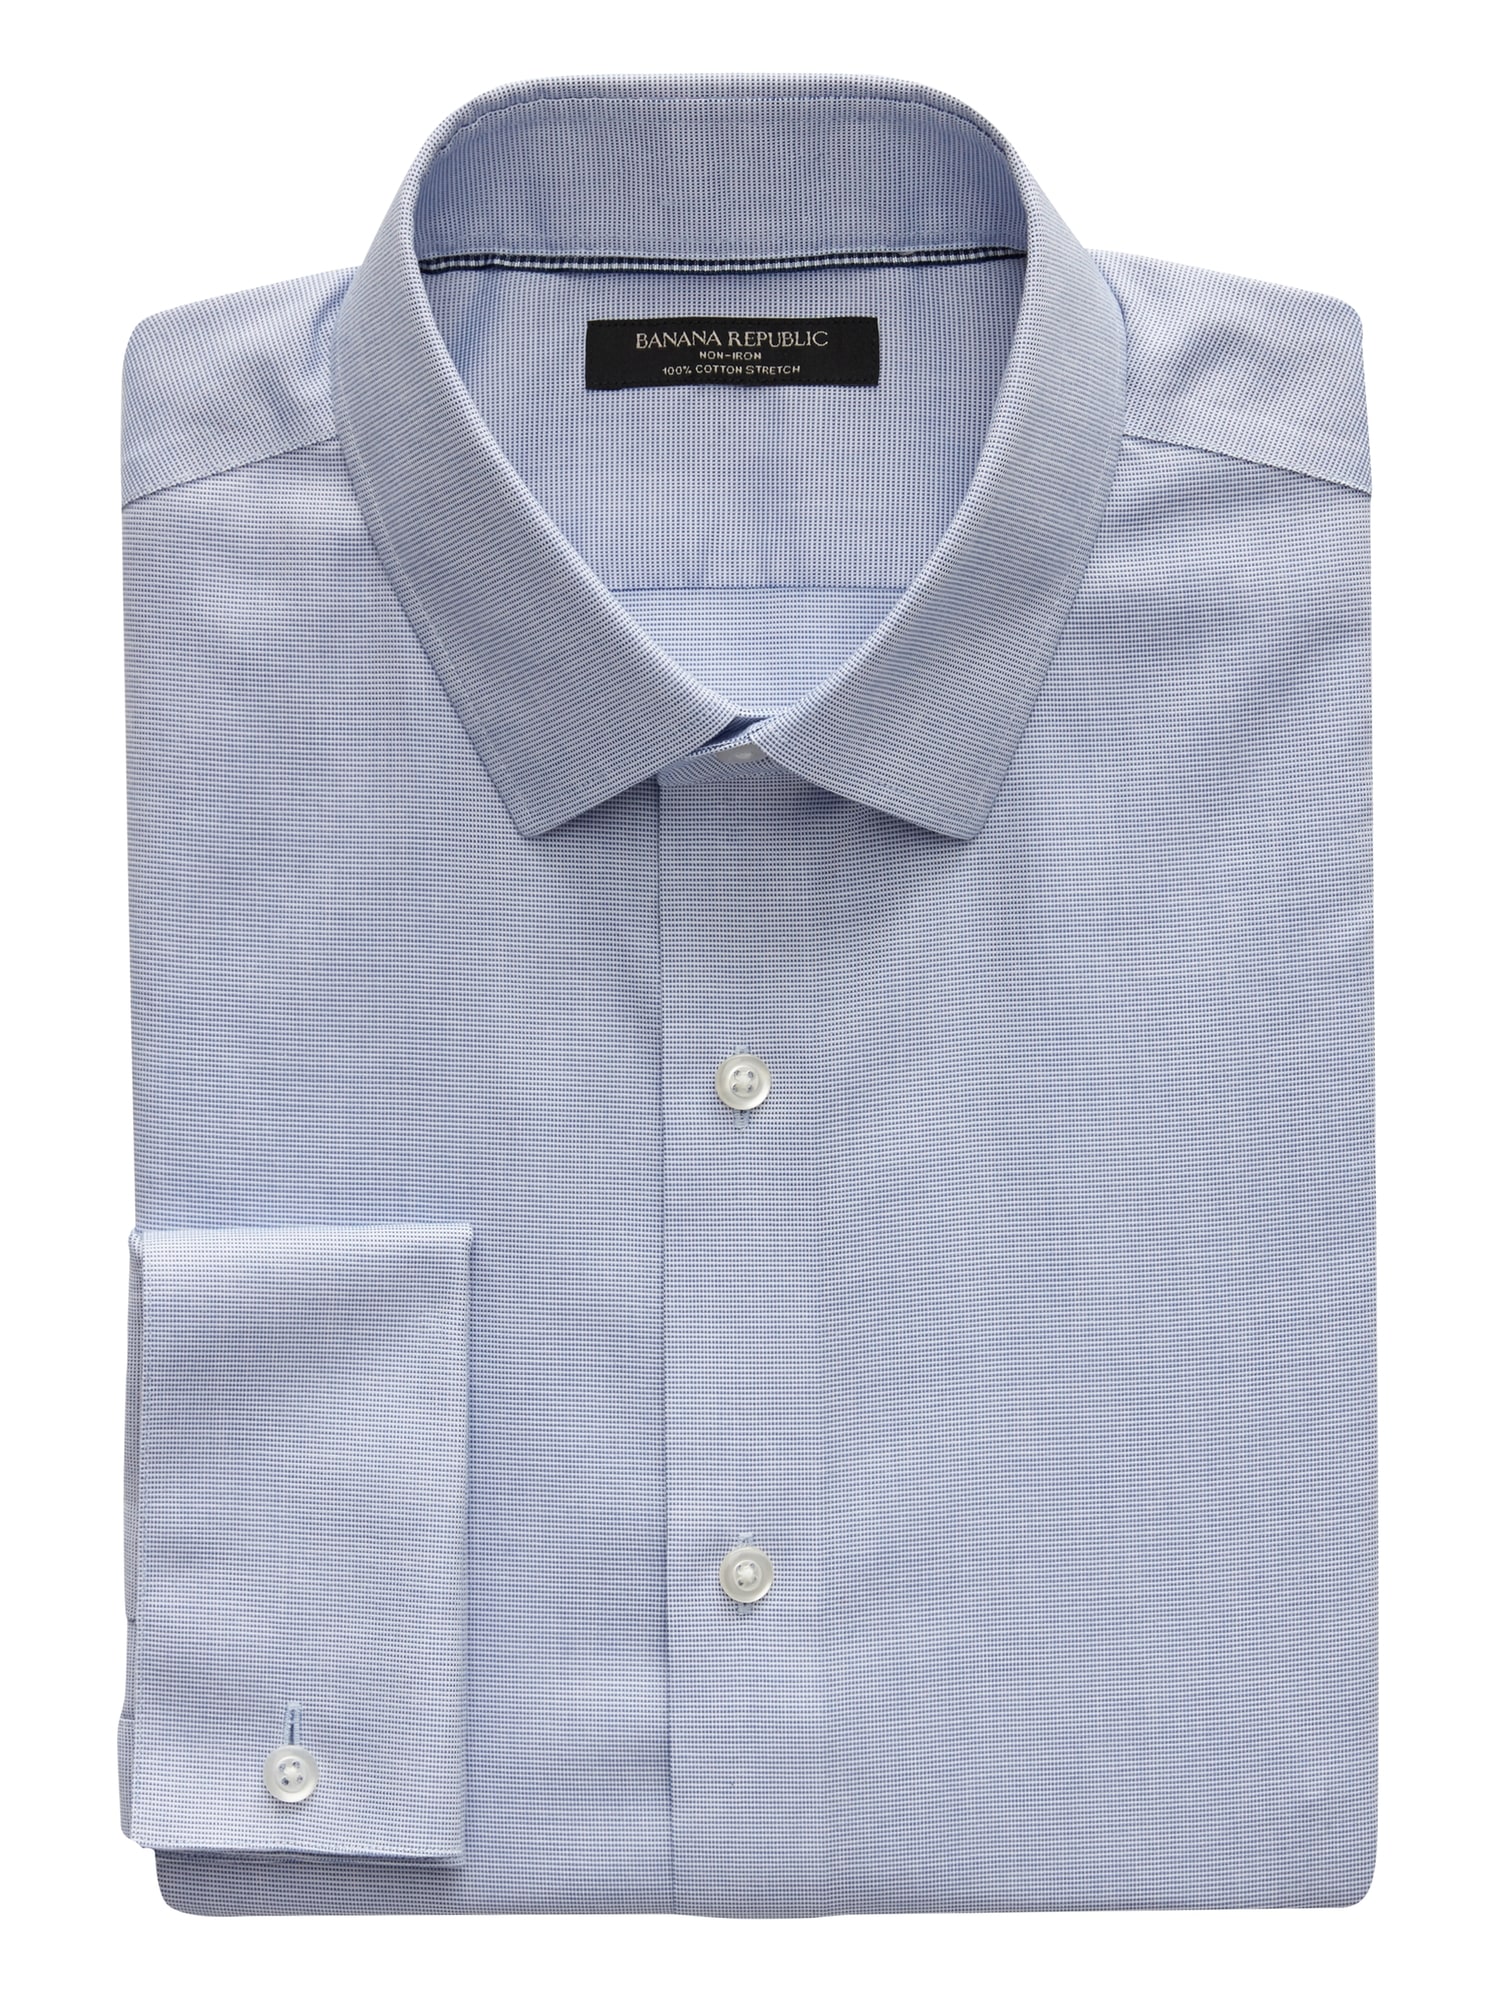 Slim-Fit Non-Iron Dress Shirt with French Cuffs